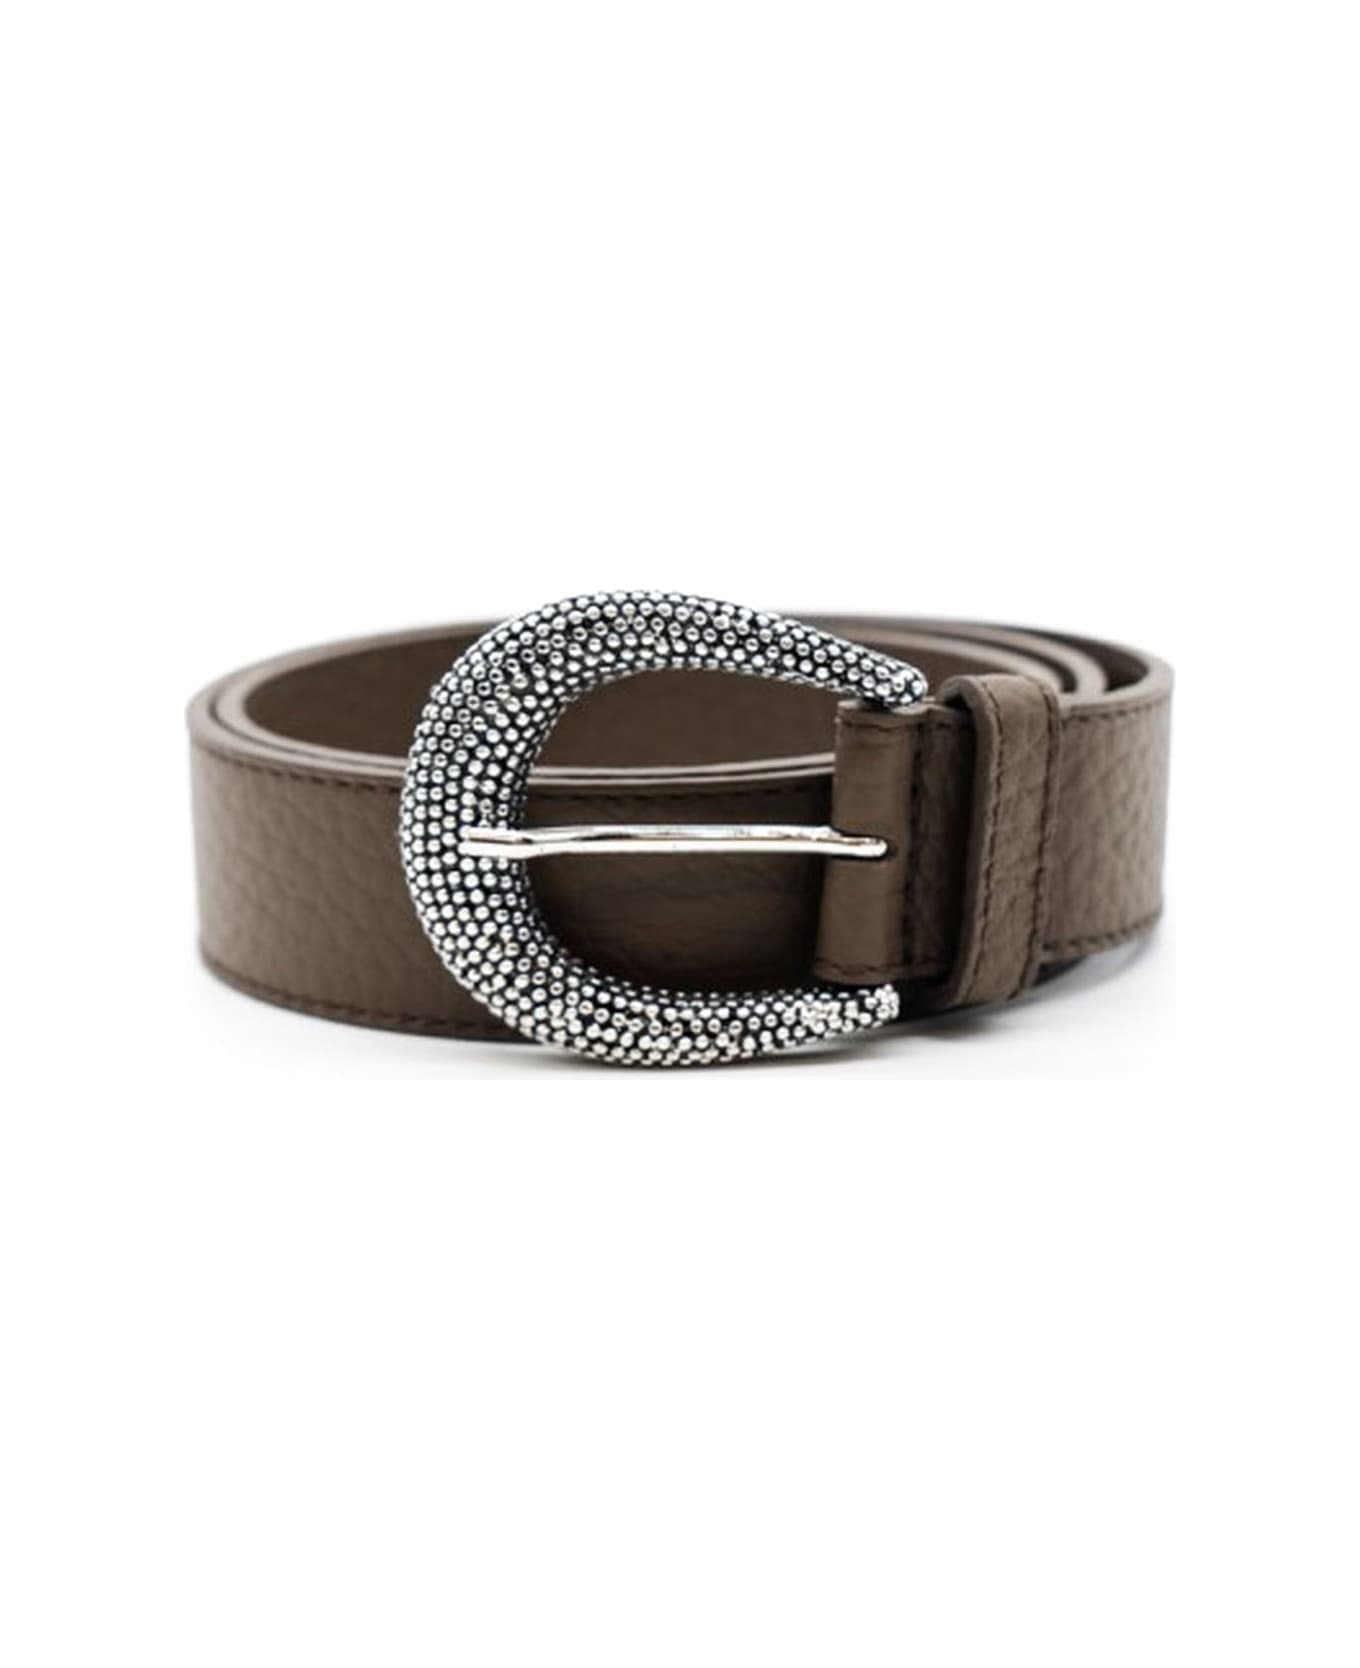 Orciani Brown Soft Leather Belt - Marrone